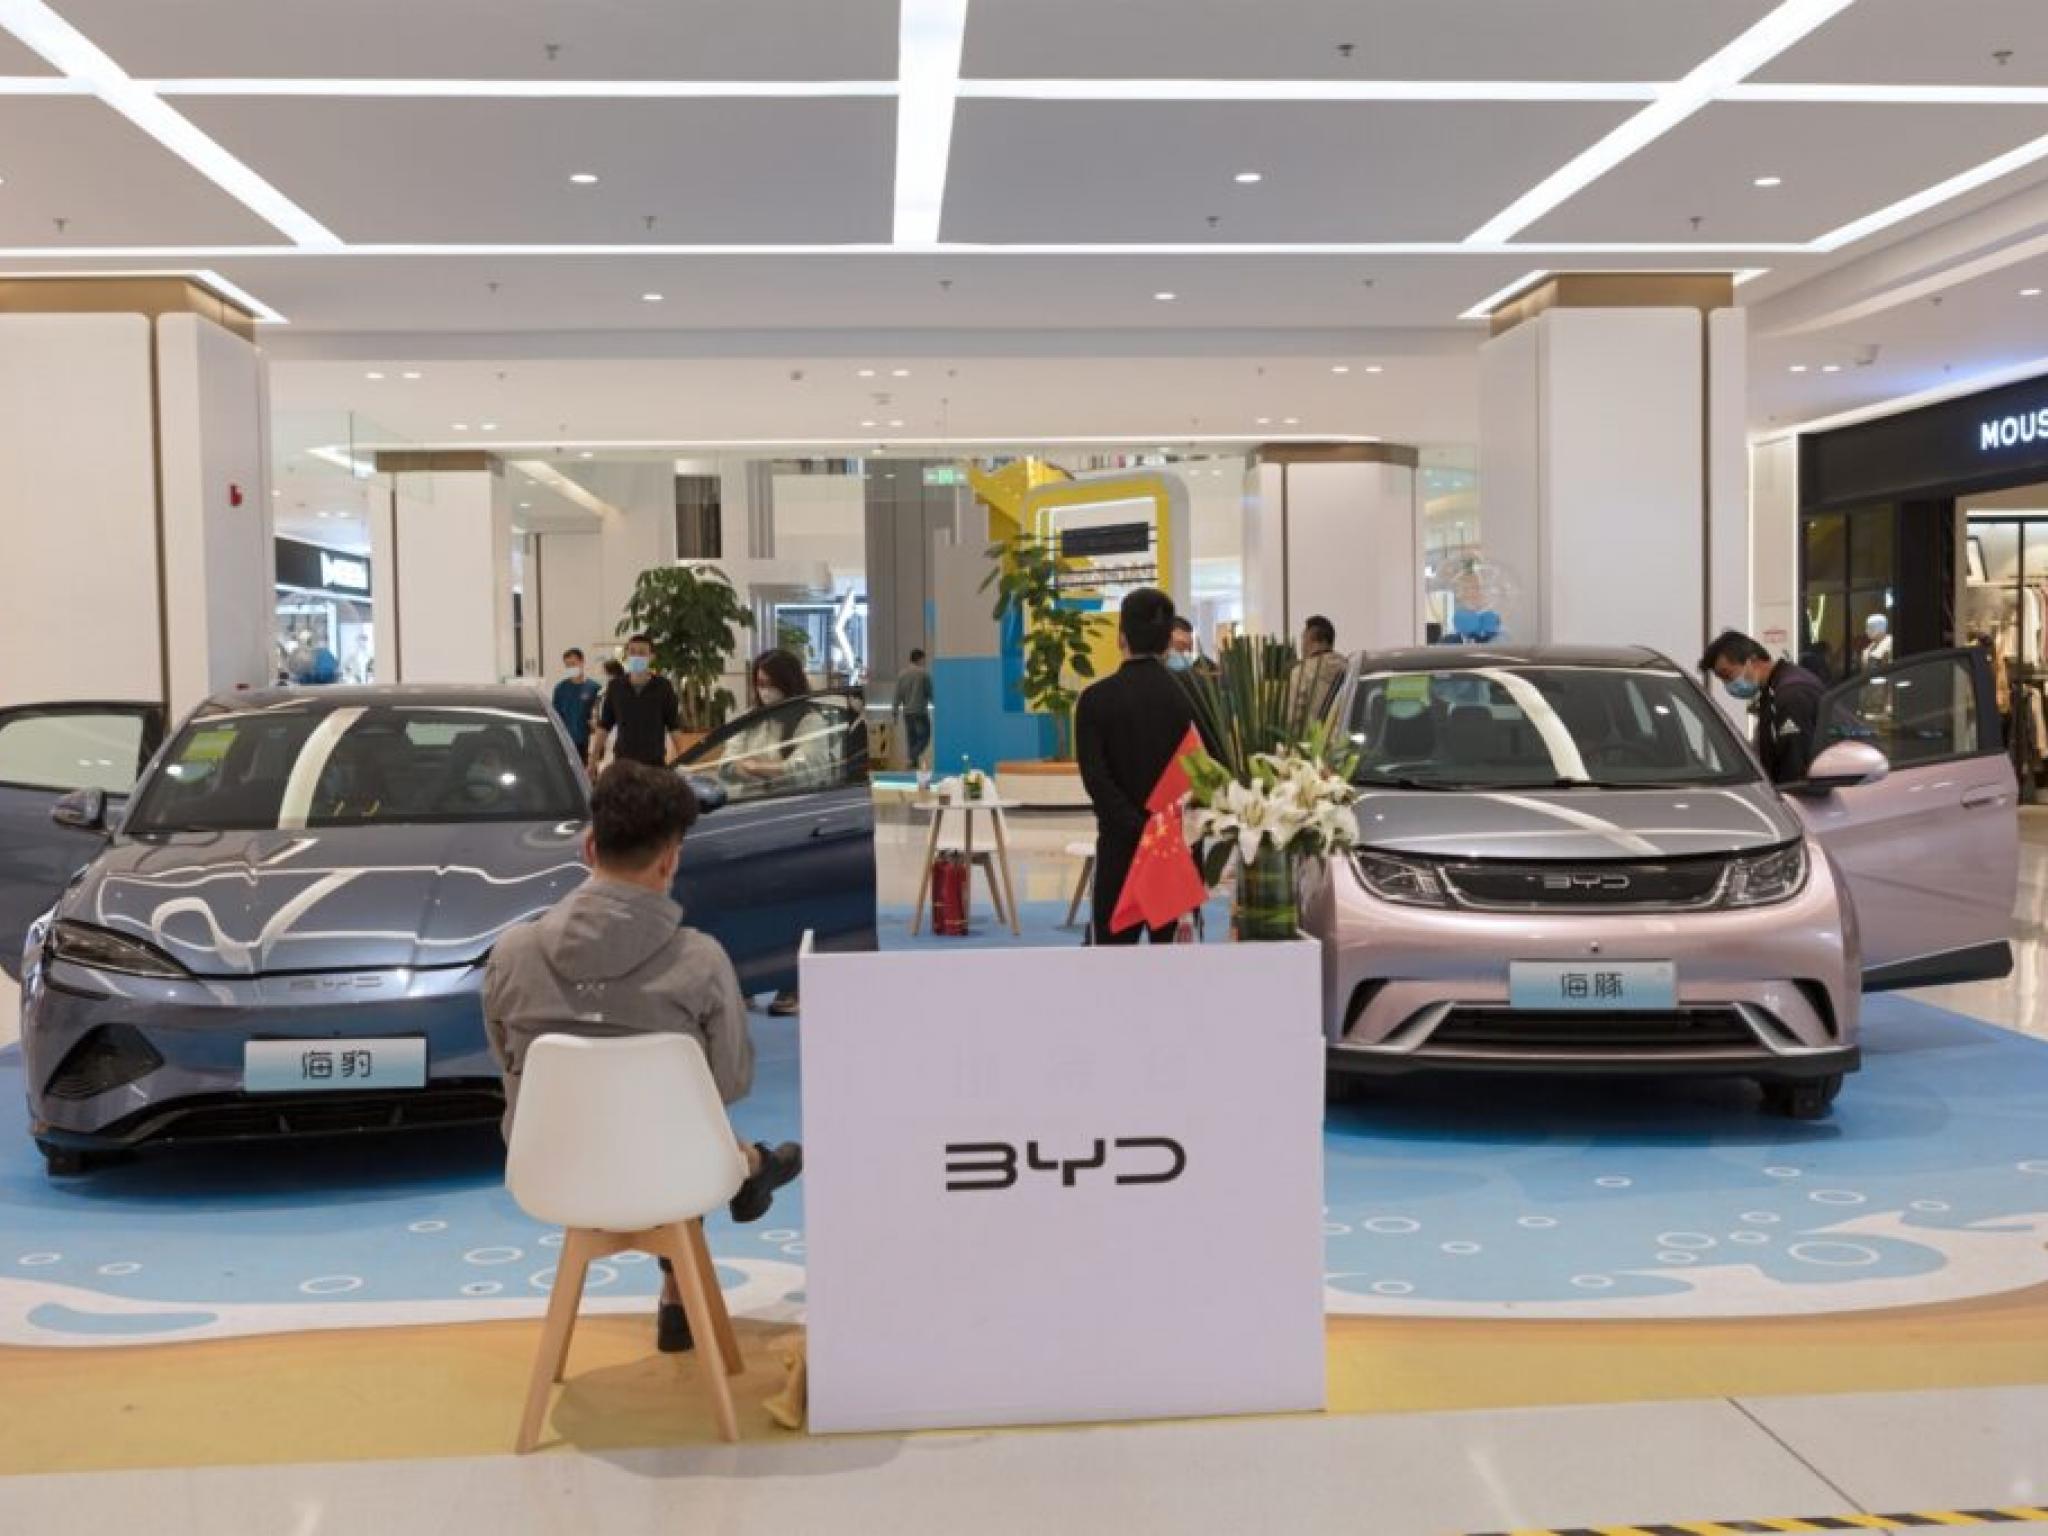  byd-faces-scrutiny-in-thailand-over-pricing-issues-report 